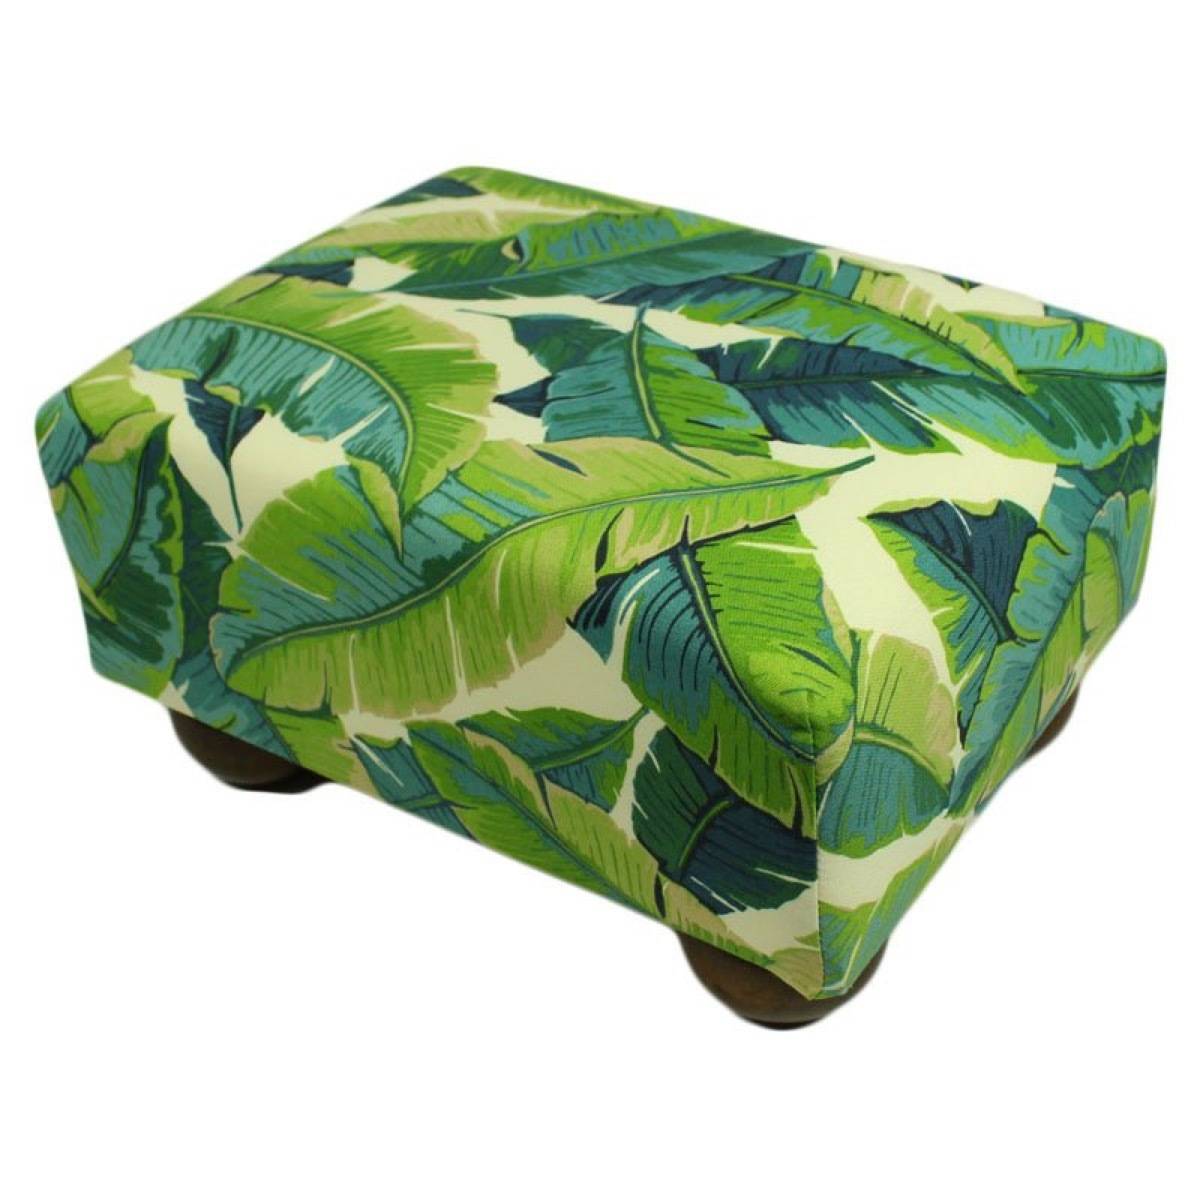 Leaves ottoman from Hayneedle